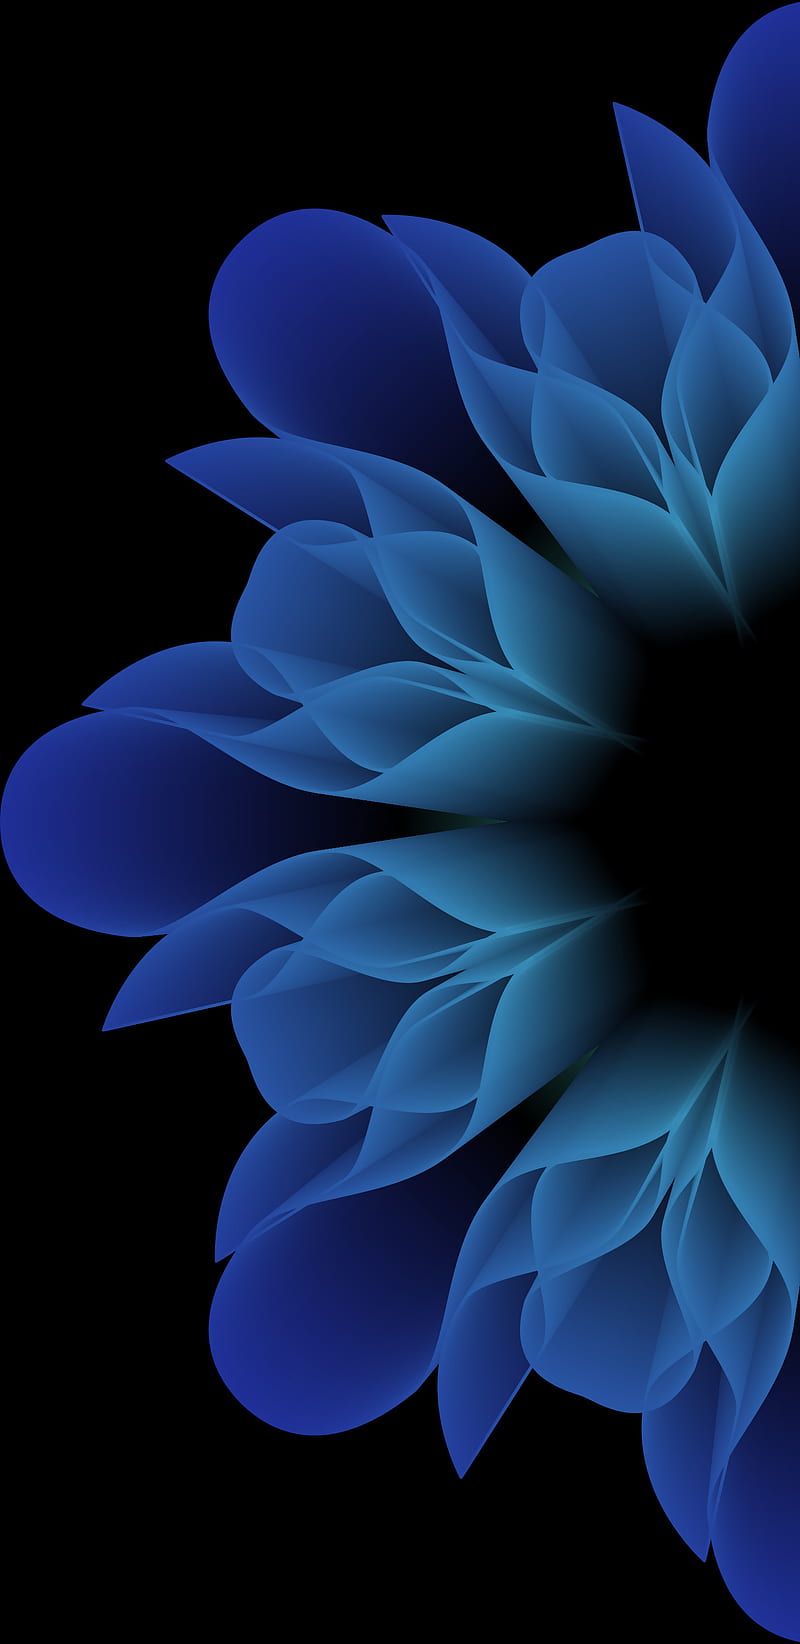 Flower, amoled, android, apple, black, dark, galaxy, ios, iphone, note, samsung, HD mobile wallpaper